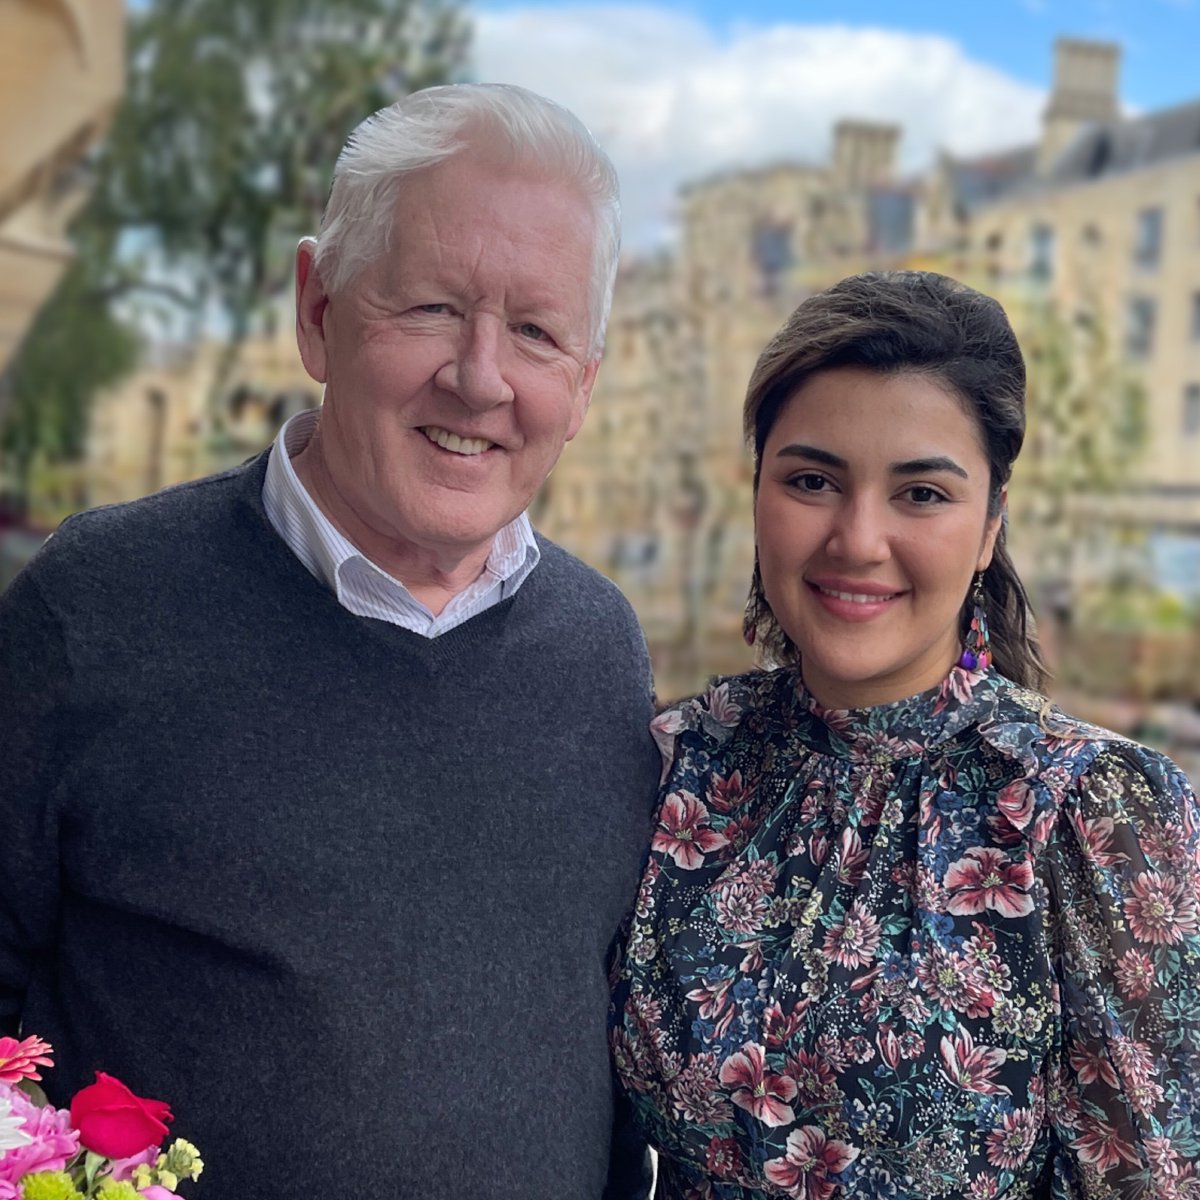 The past weekend saw #Rhodes120 take place & many of the alumni returned to celebrate 120 yrs of #RhodesScholarship @rhodes_trust.

It was an honour to meet up with @BobRae48 & grab a hot choc - a great man who has dedicated his life to public service & #humanrights. Shine on!